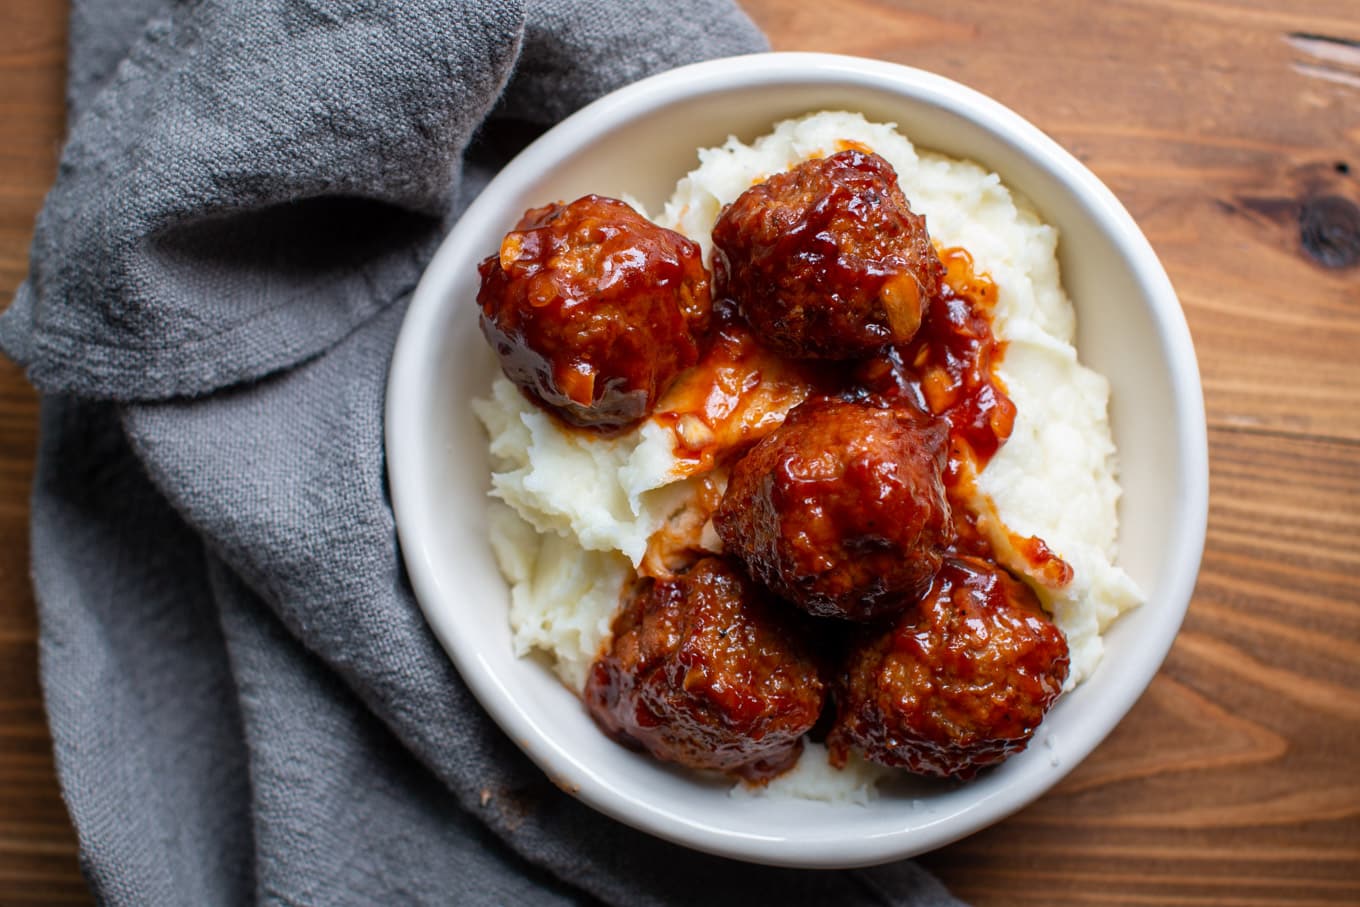 meatballs over mashed potatoes in a bowl.